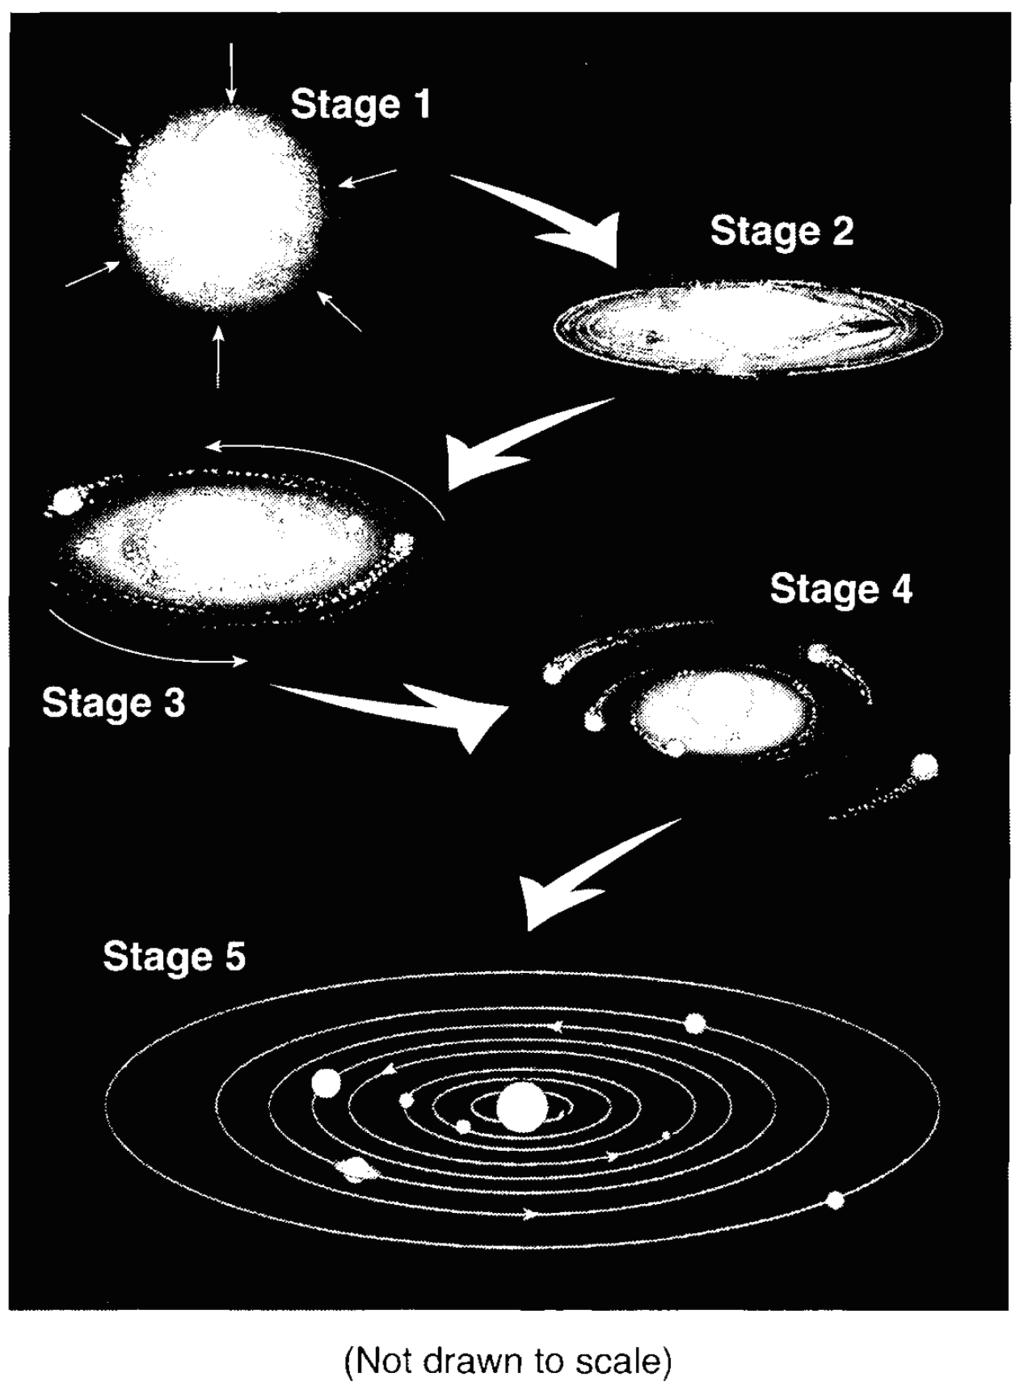 Base your answers to questions 32 through 34 on the diagram below. The diagram represents the inferred stages in the formation of our solar system. Stage 1 shows a contracting gas cloud.